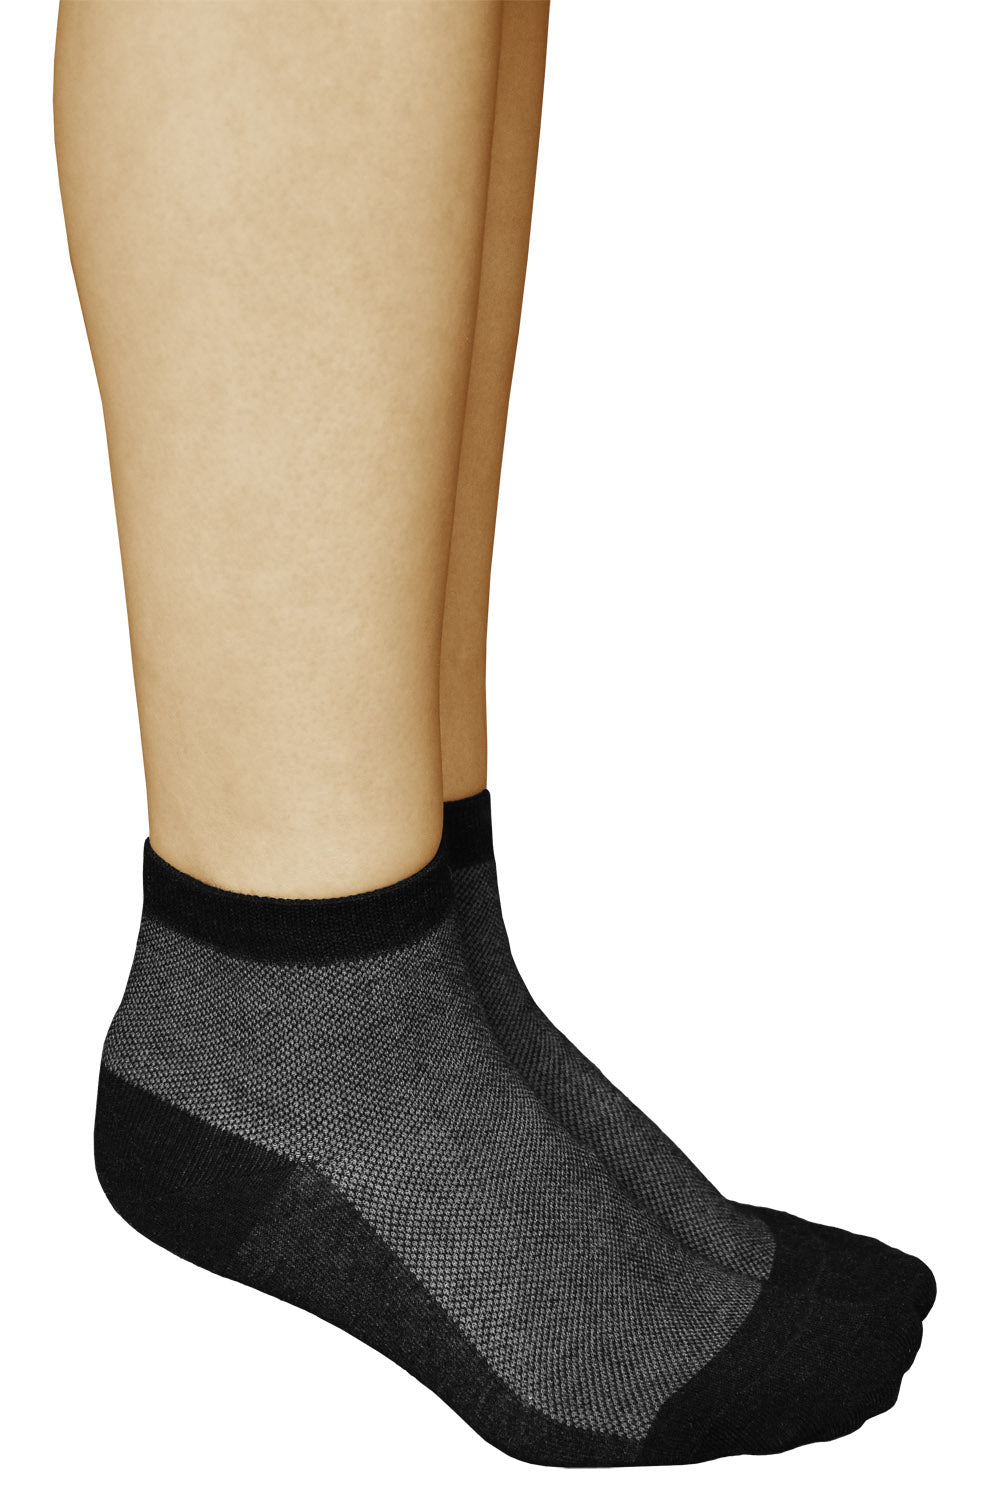 SWEAT GUARD® 5% Silver New Ankle Socks - 2 Pairs